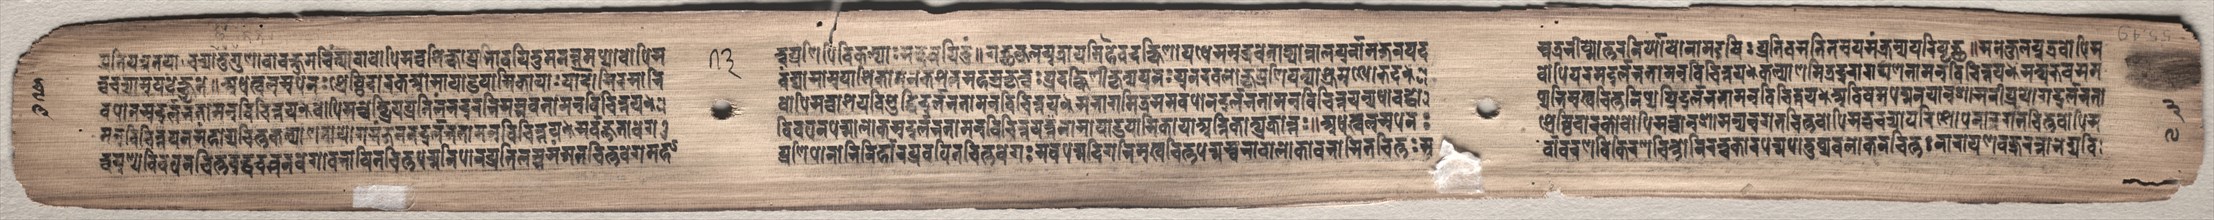 Leaf from Gandavyuha: text, from Chapter 10 Asha (verso), 1000-1100s. Eastern India, Pala period.